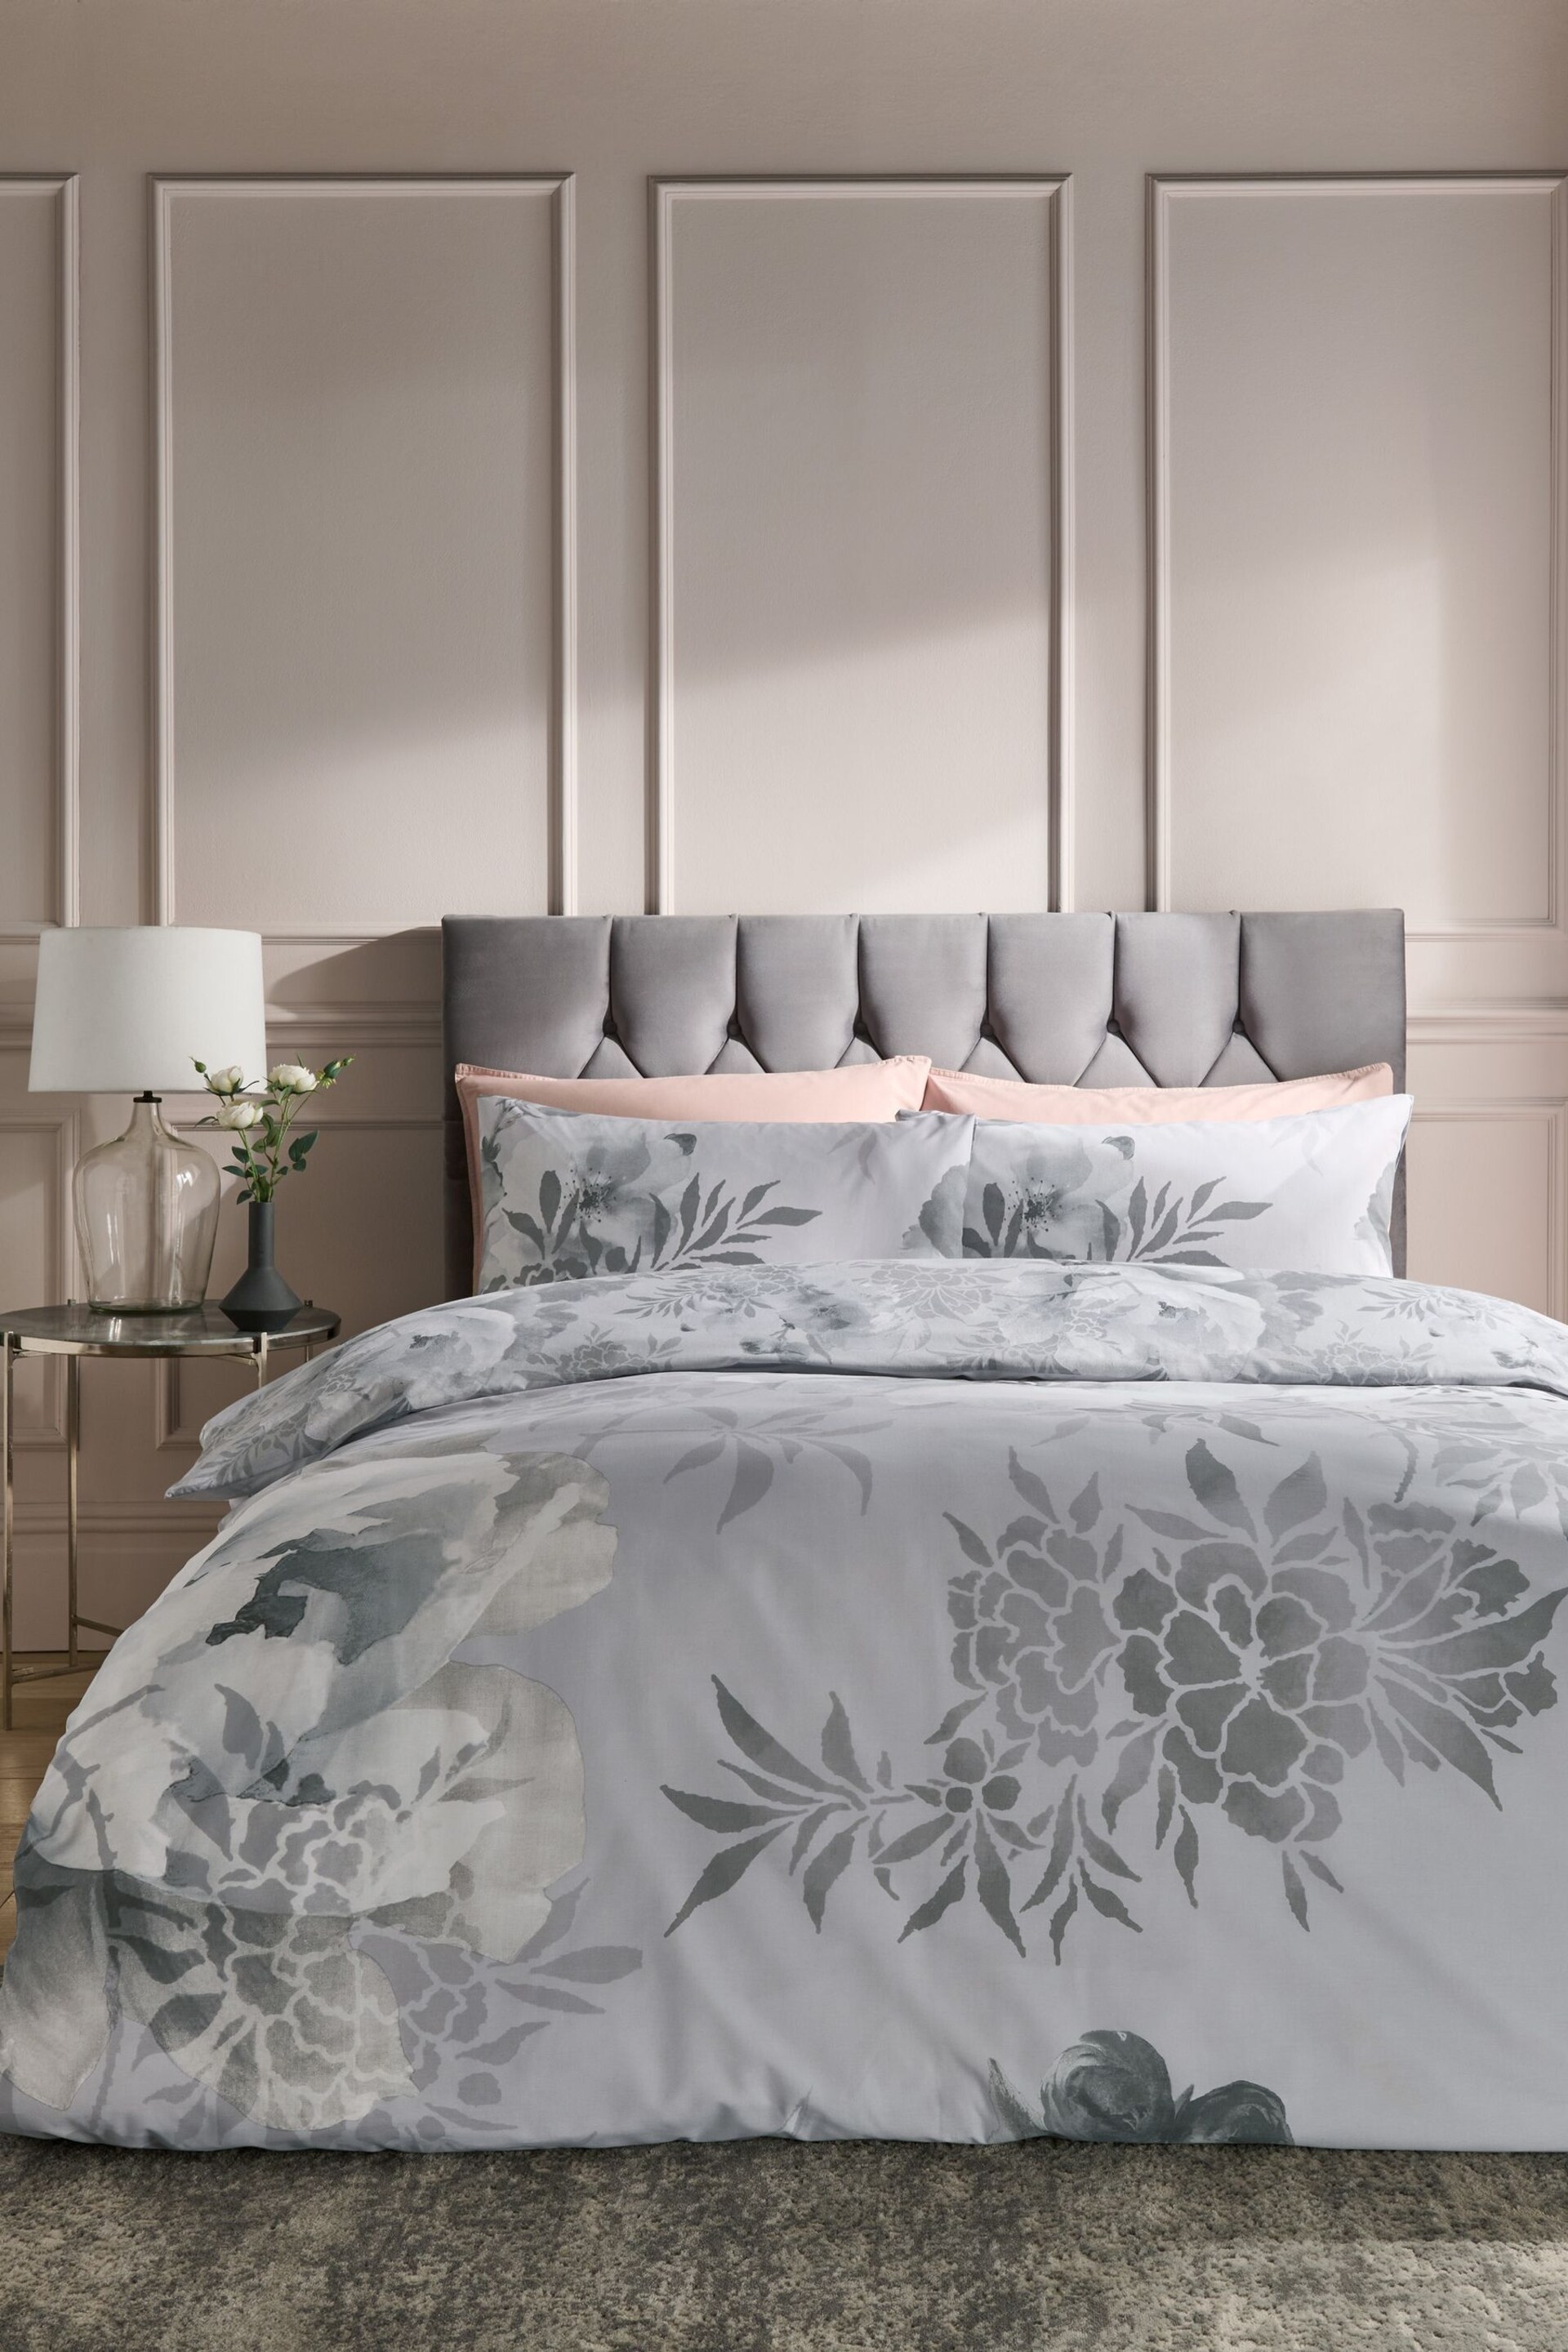 Catherine Lansfield Silver Dramatic Floral Duvet Cover And Pillowcase Set - Image 1 of 4